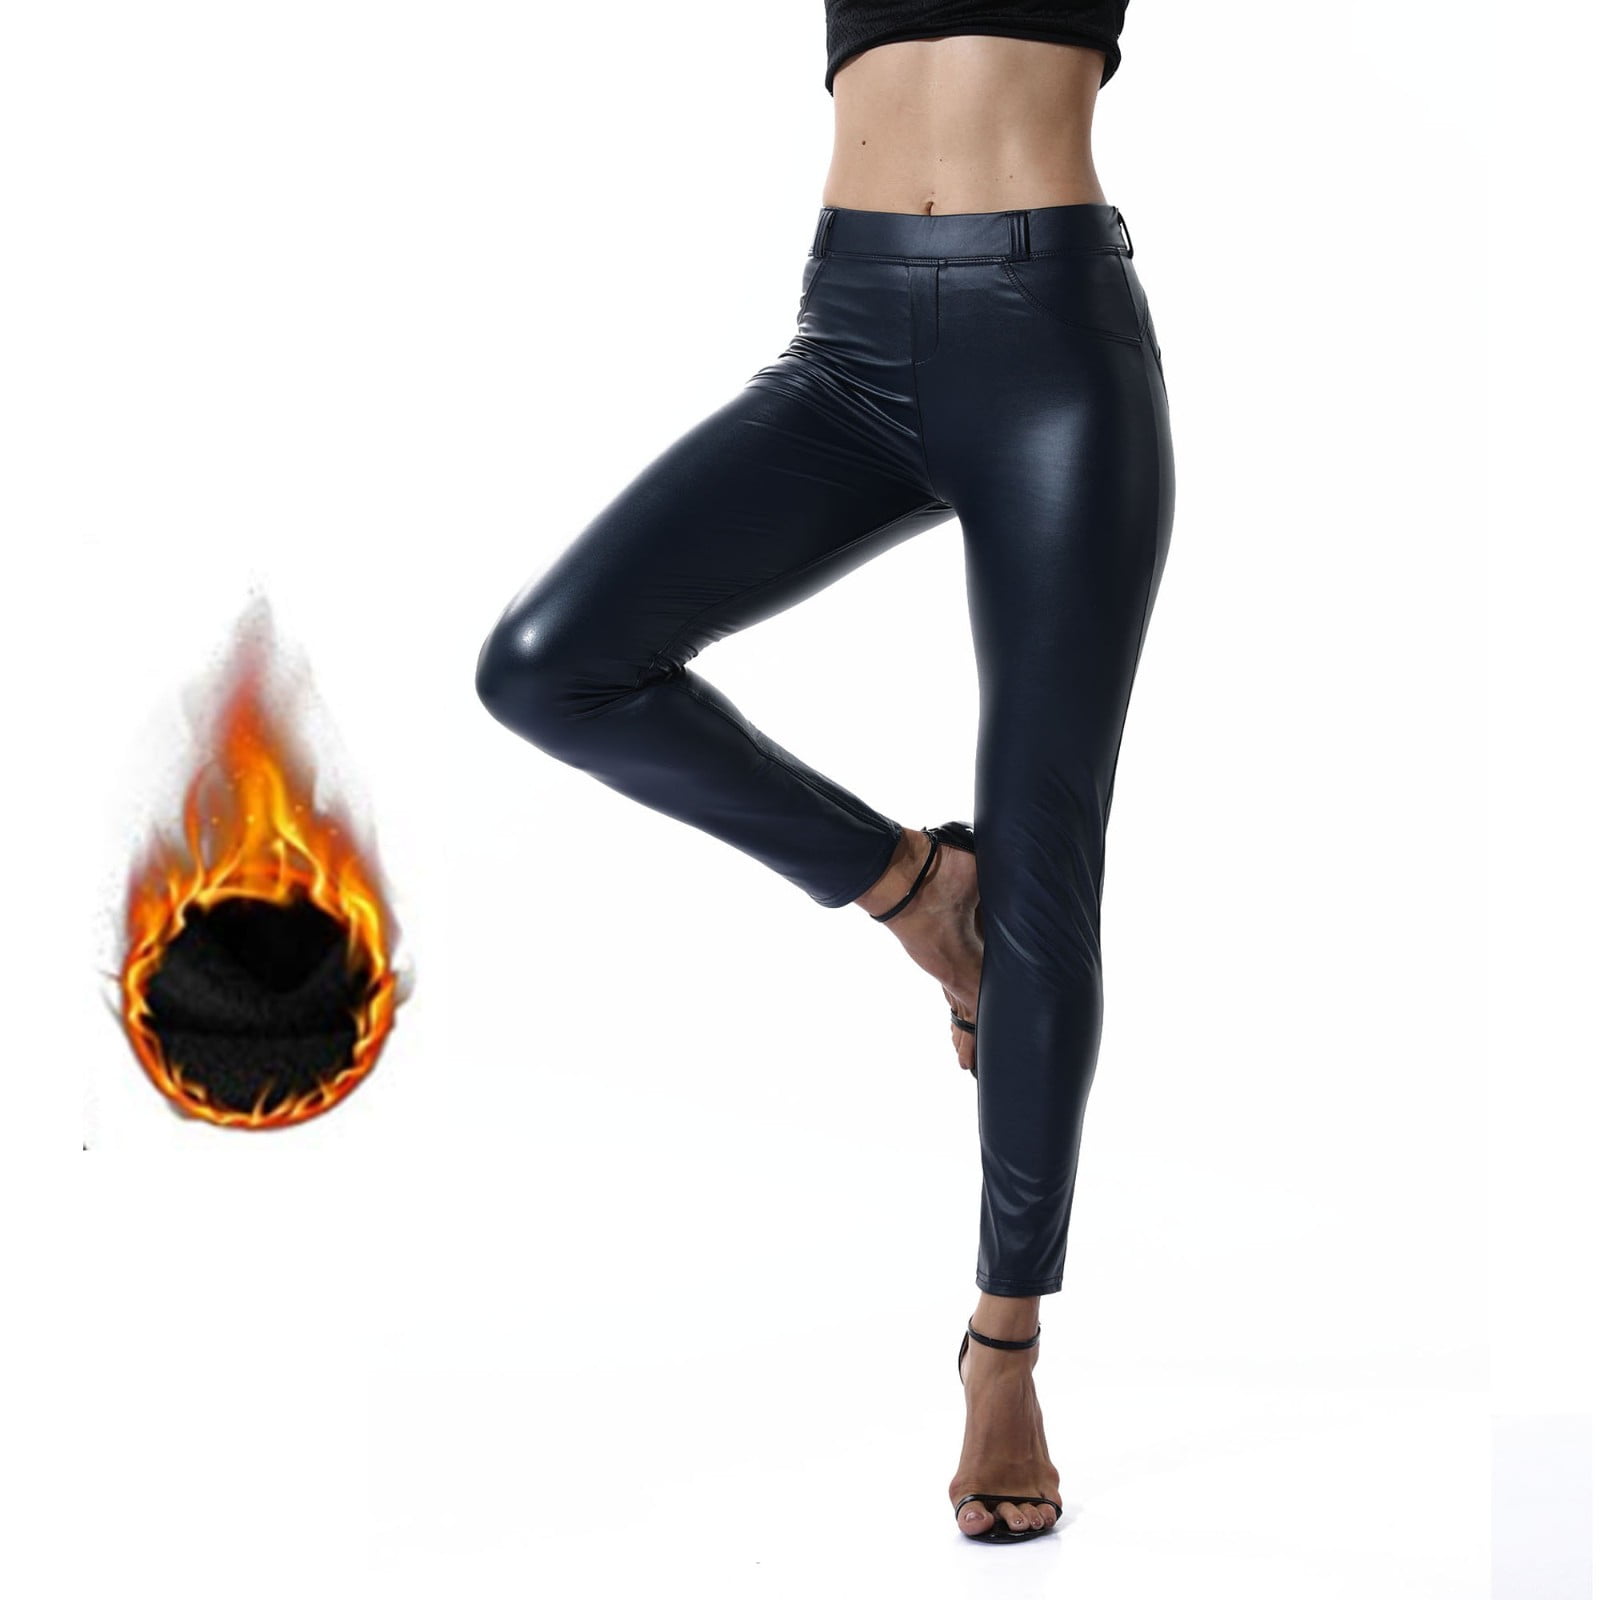 Womens Stretch Patch Leather Butt Life Skinny High Waist Yoga Pants Leggings 